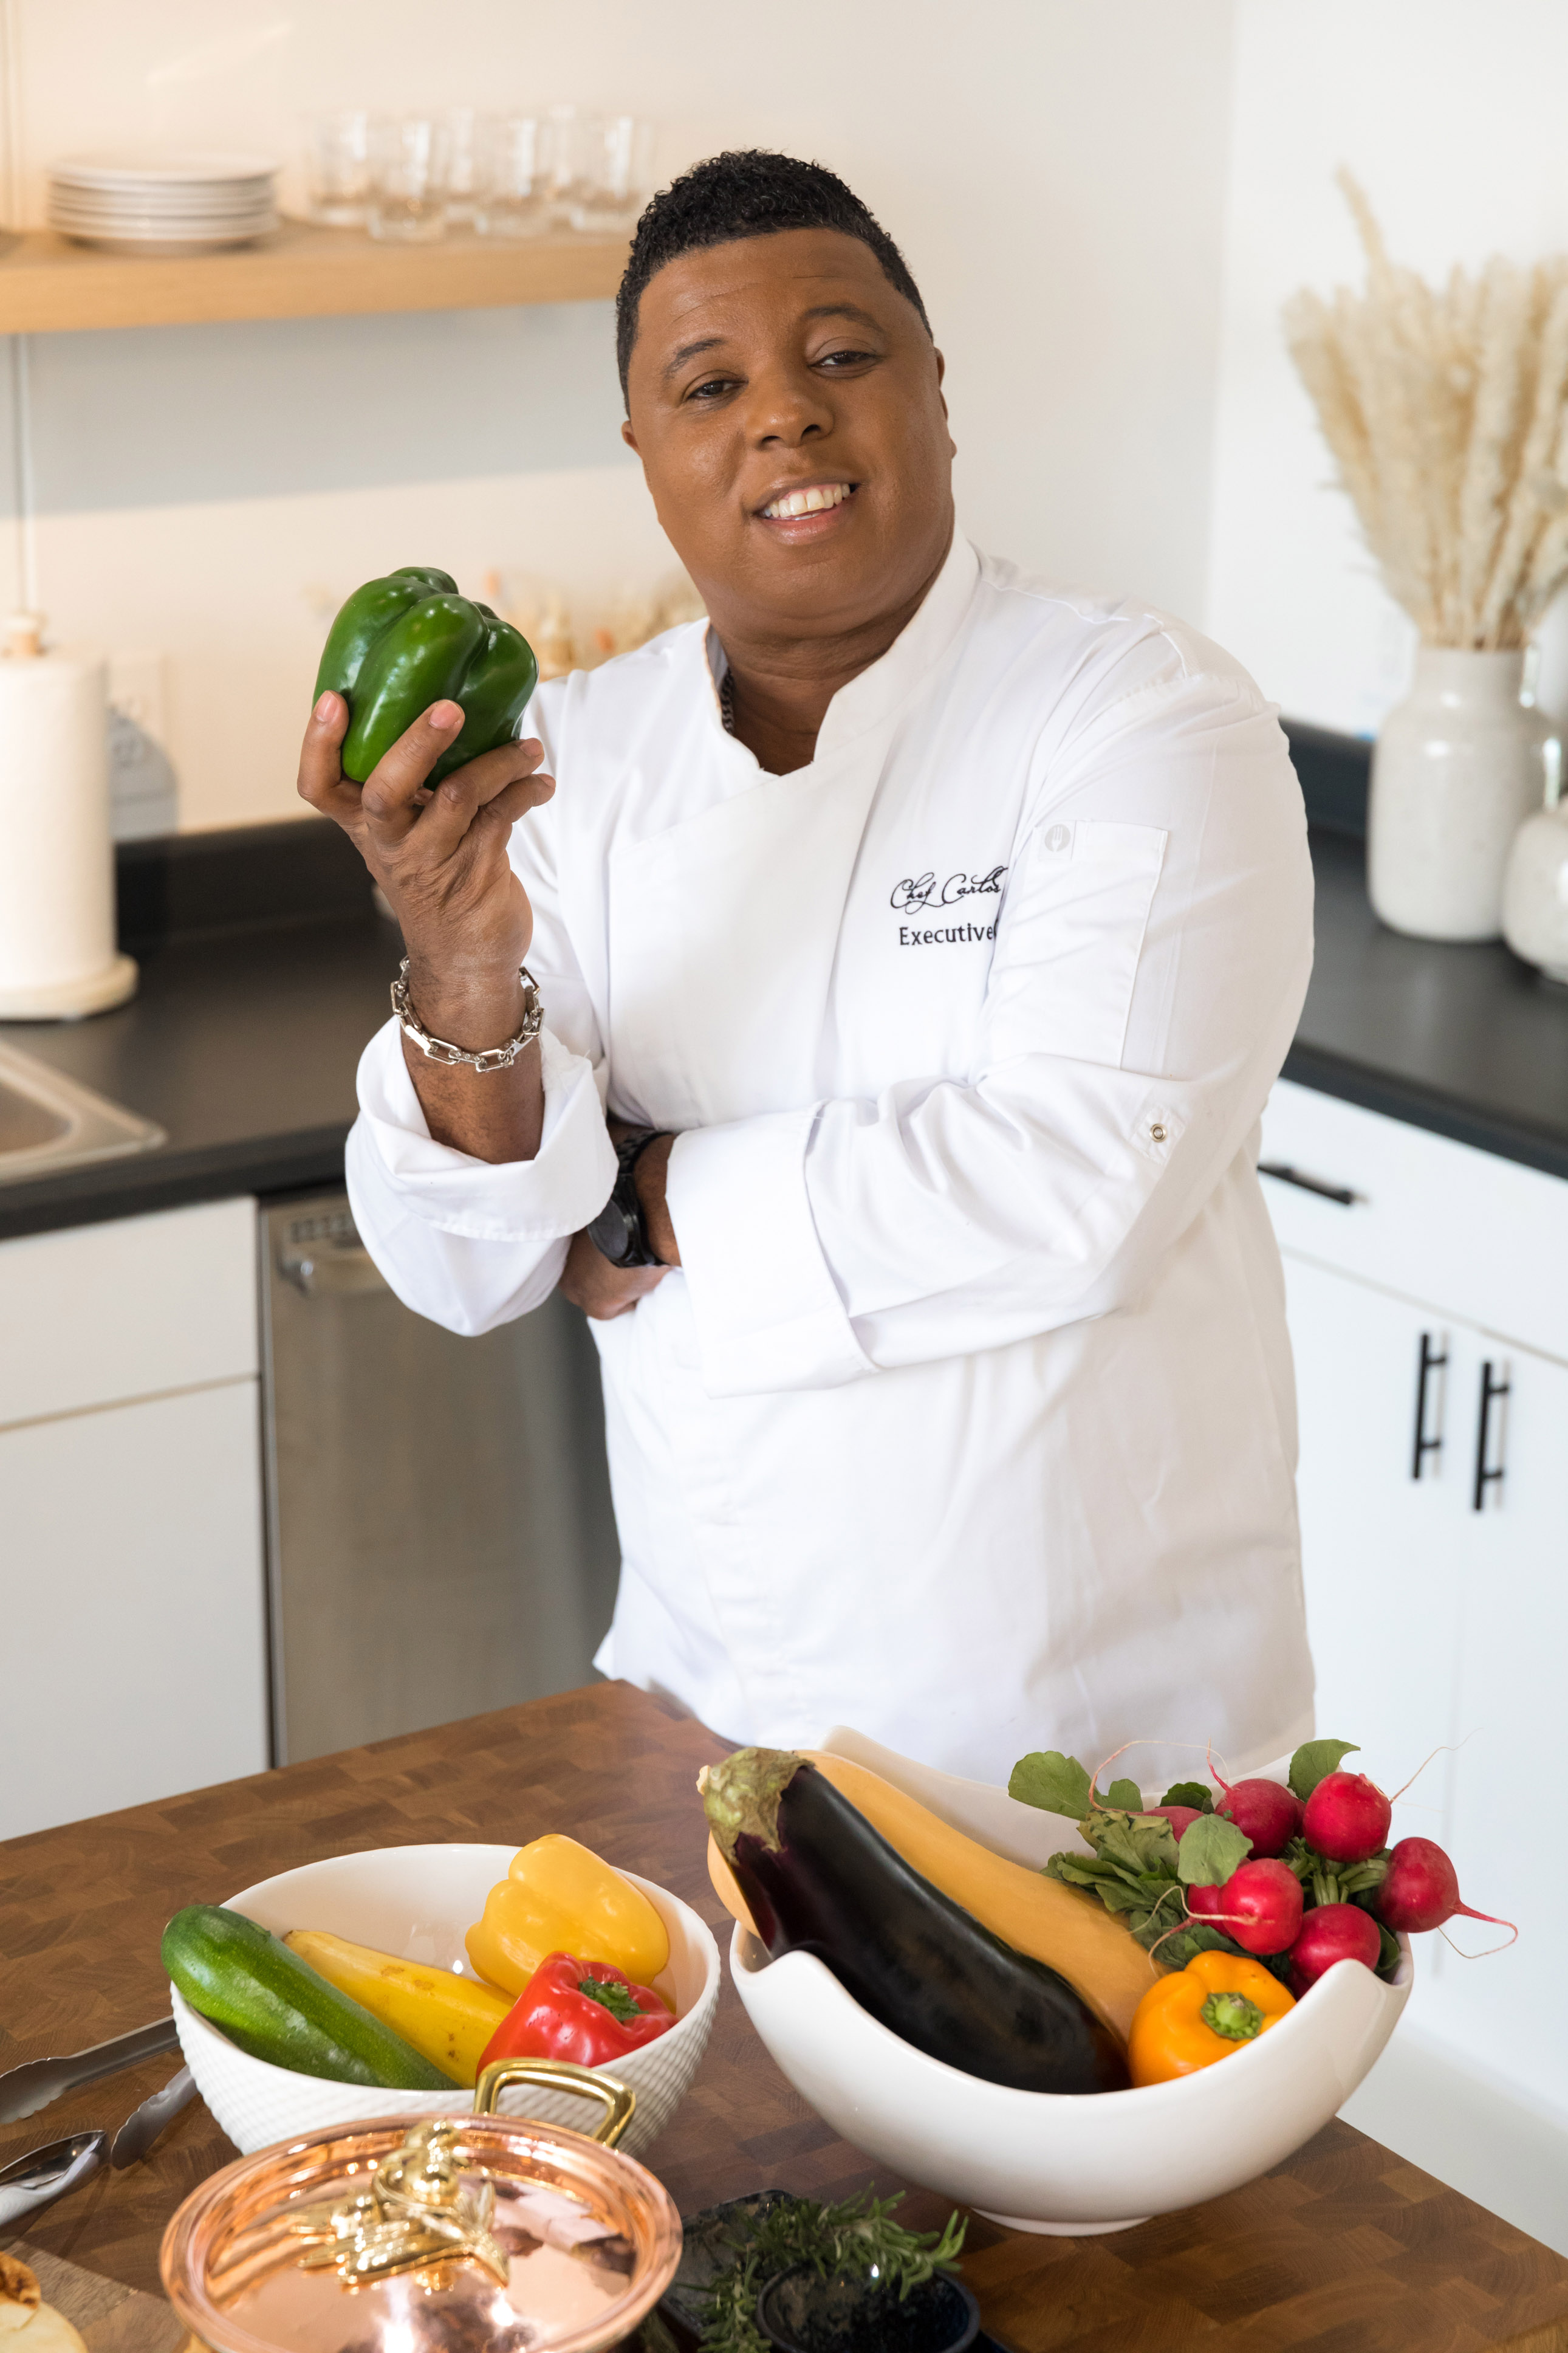 Men’s Health Month – Celebrity Executive Chef Carlos Brown shares healthy eating options